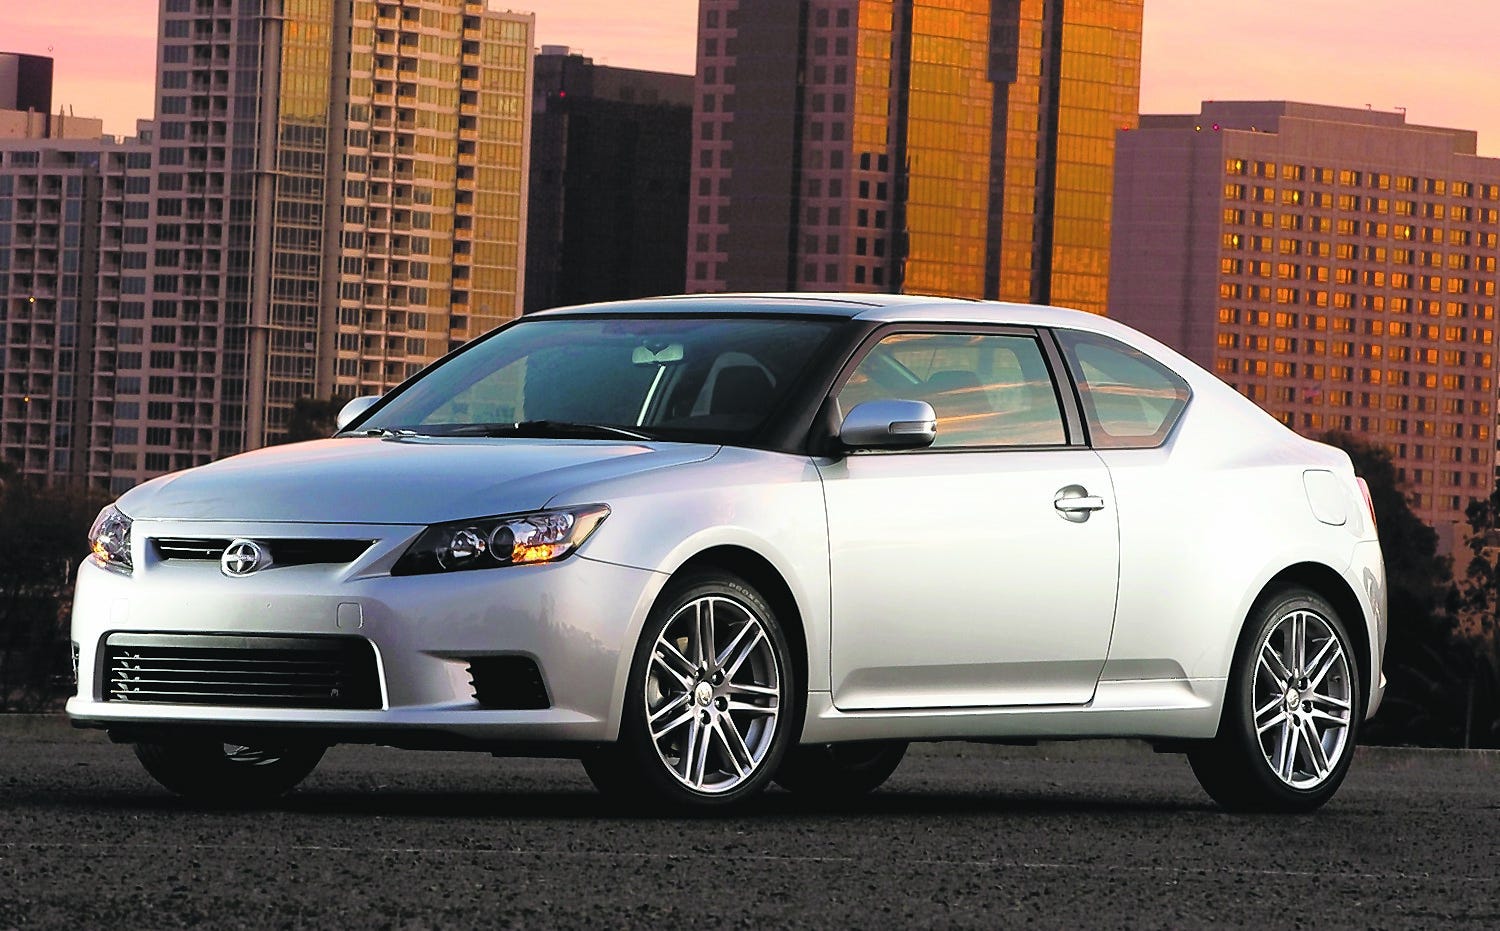 Scion tC is geared to the young